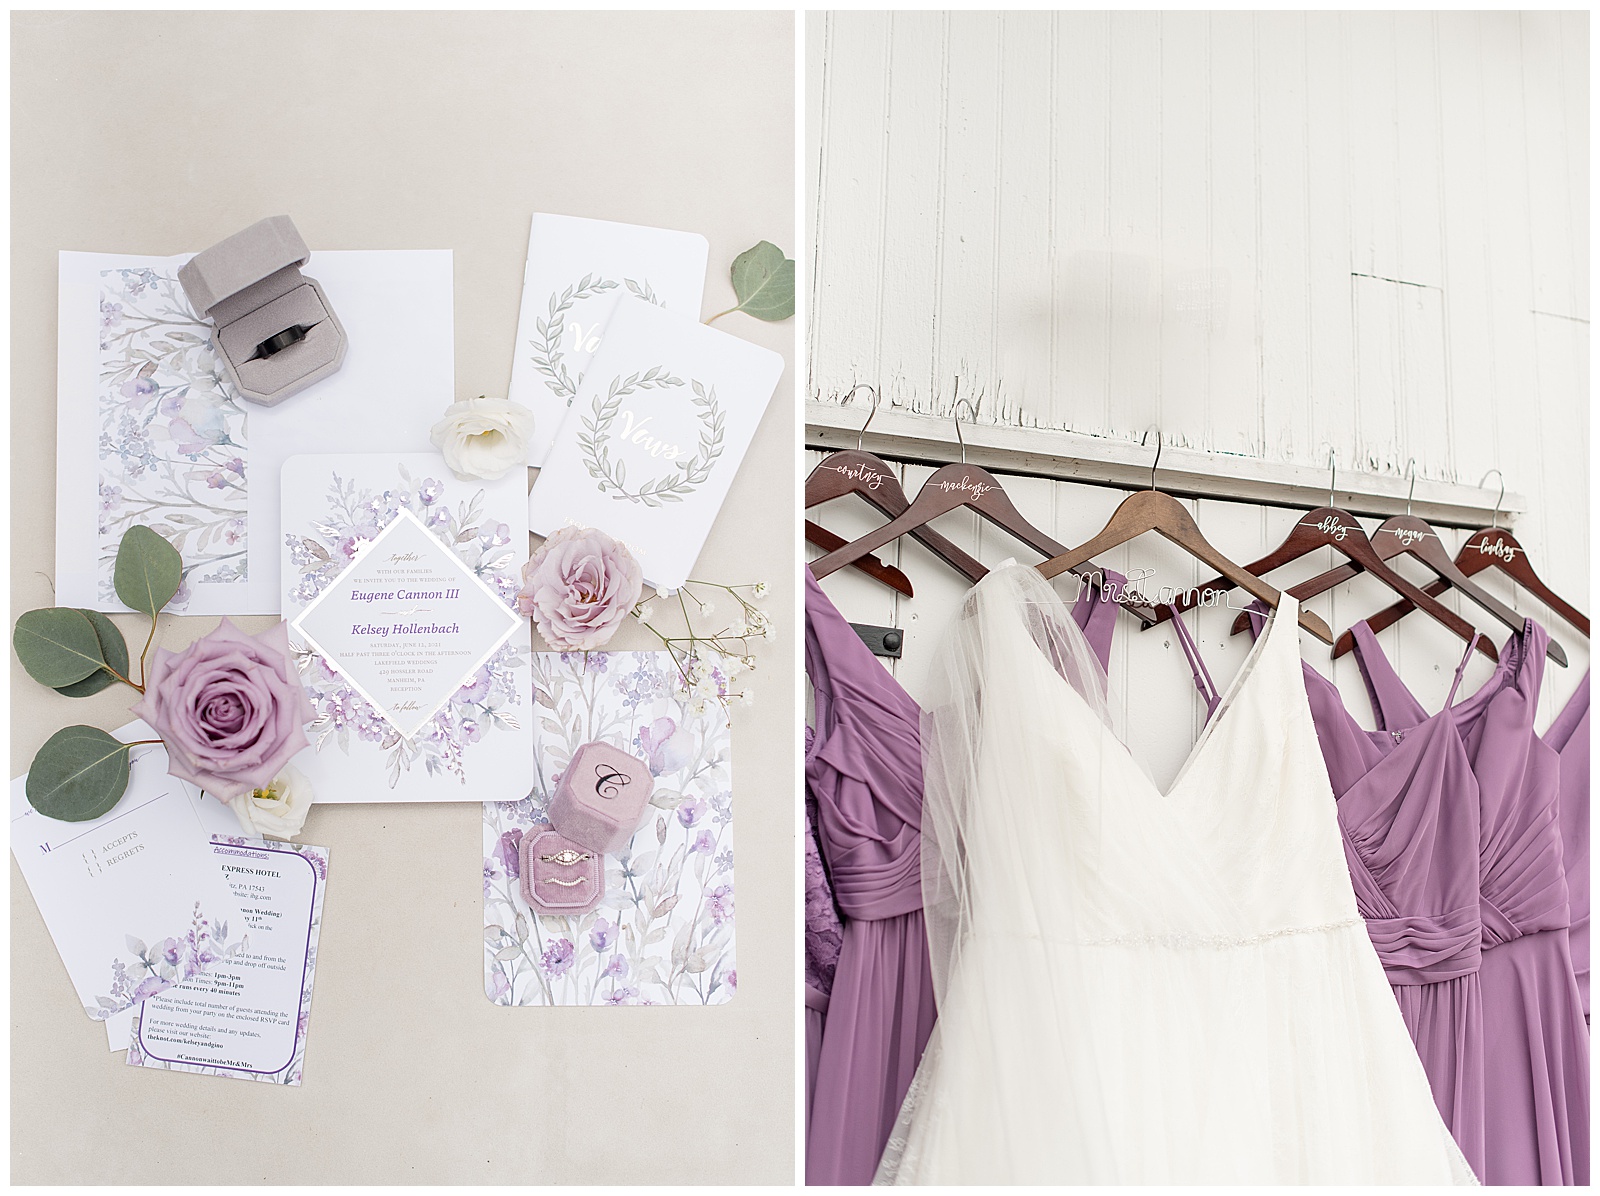 white and lavender wedding invitation surrounded by wedding rings and jewelry in flat-lay photo